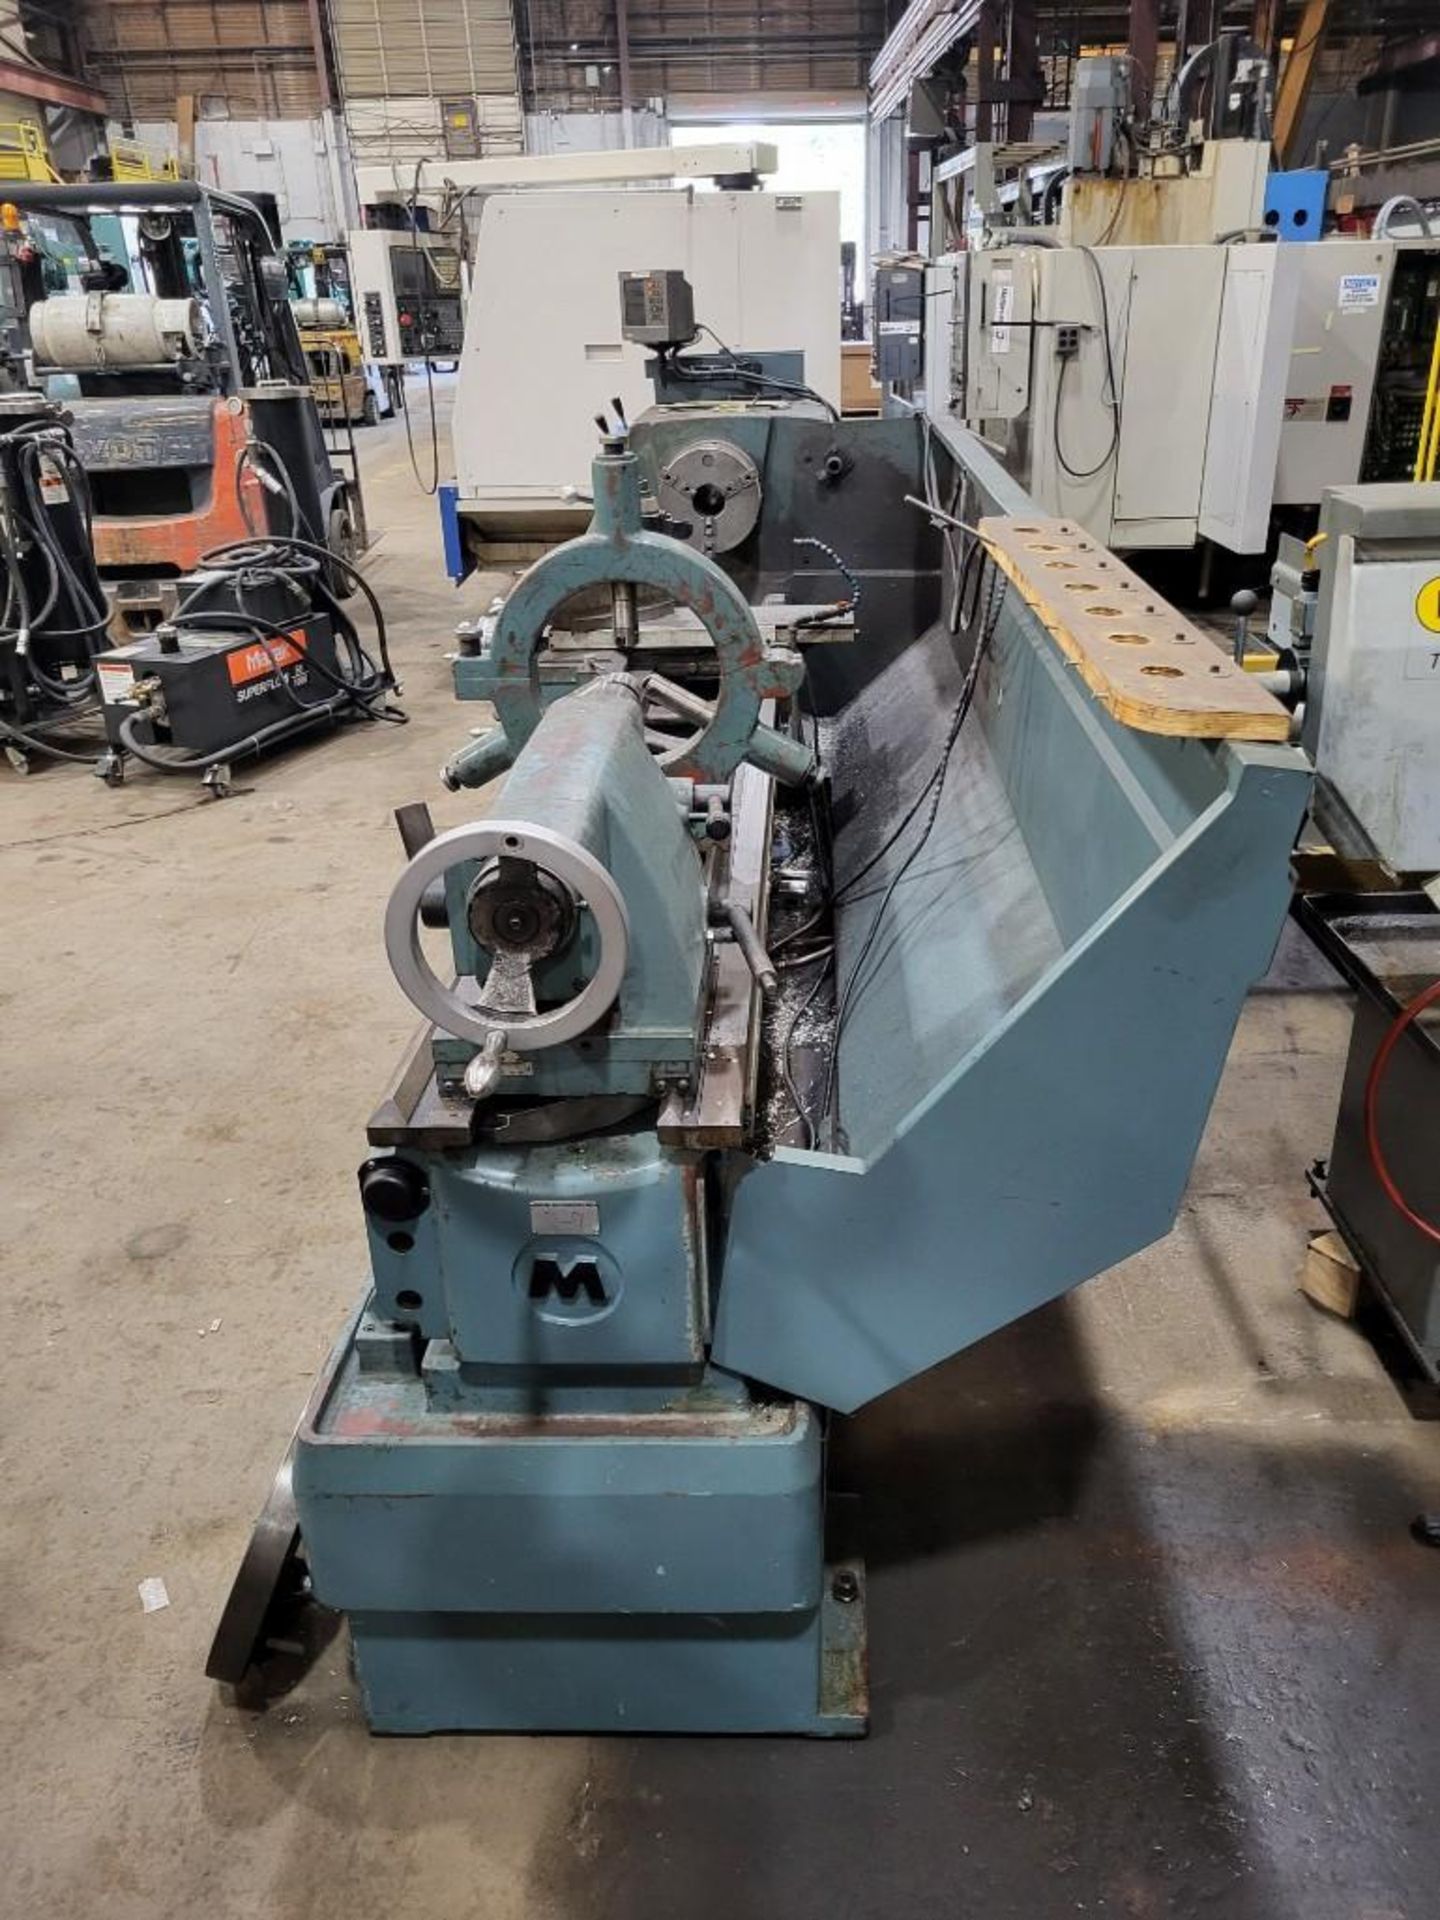 VICTOR 2080S 20" X 80" GAP BED PRECISION LATHE, WITH TAILSTOCK, CHUCK, STEADY REST, TOOLING - Image 5 of 28